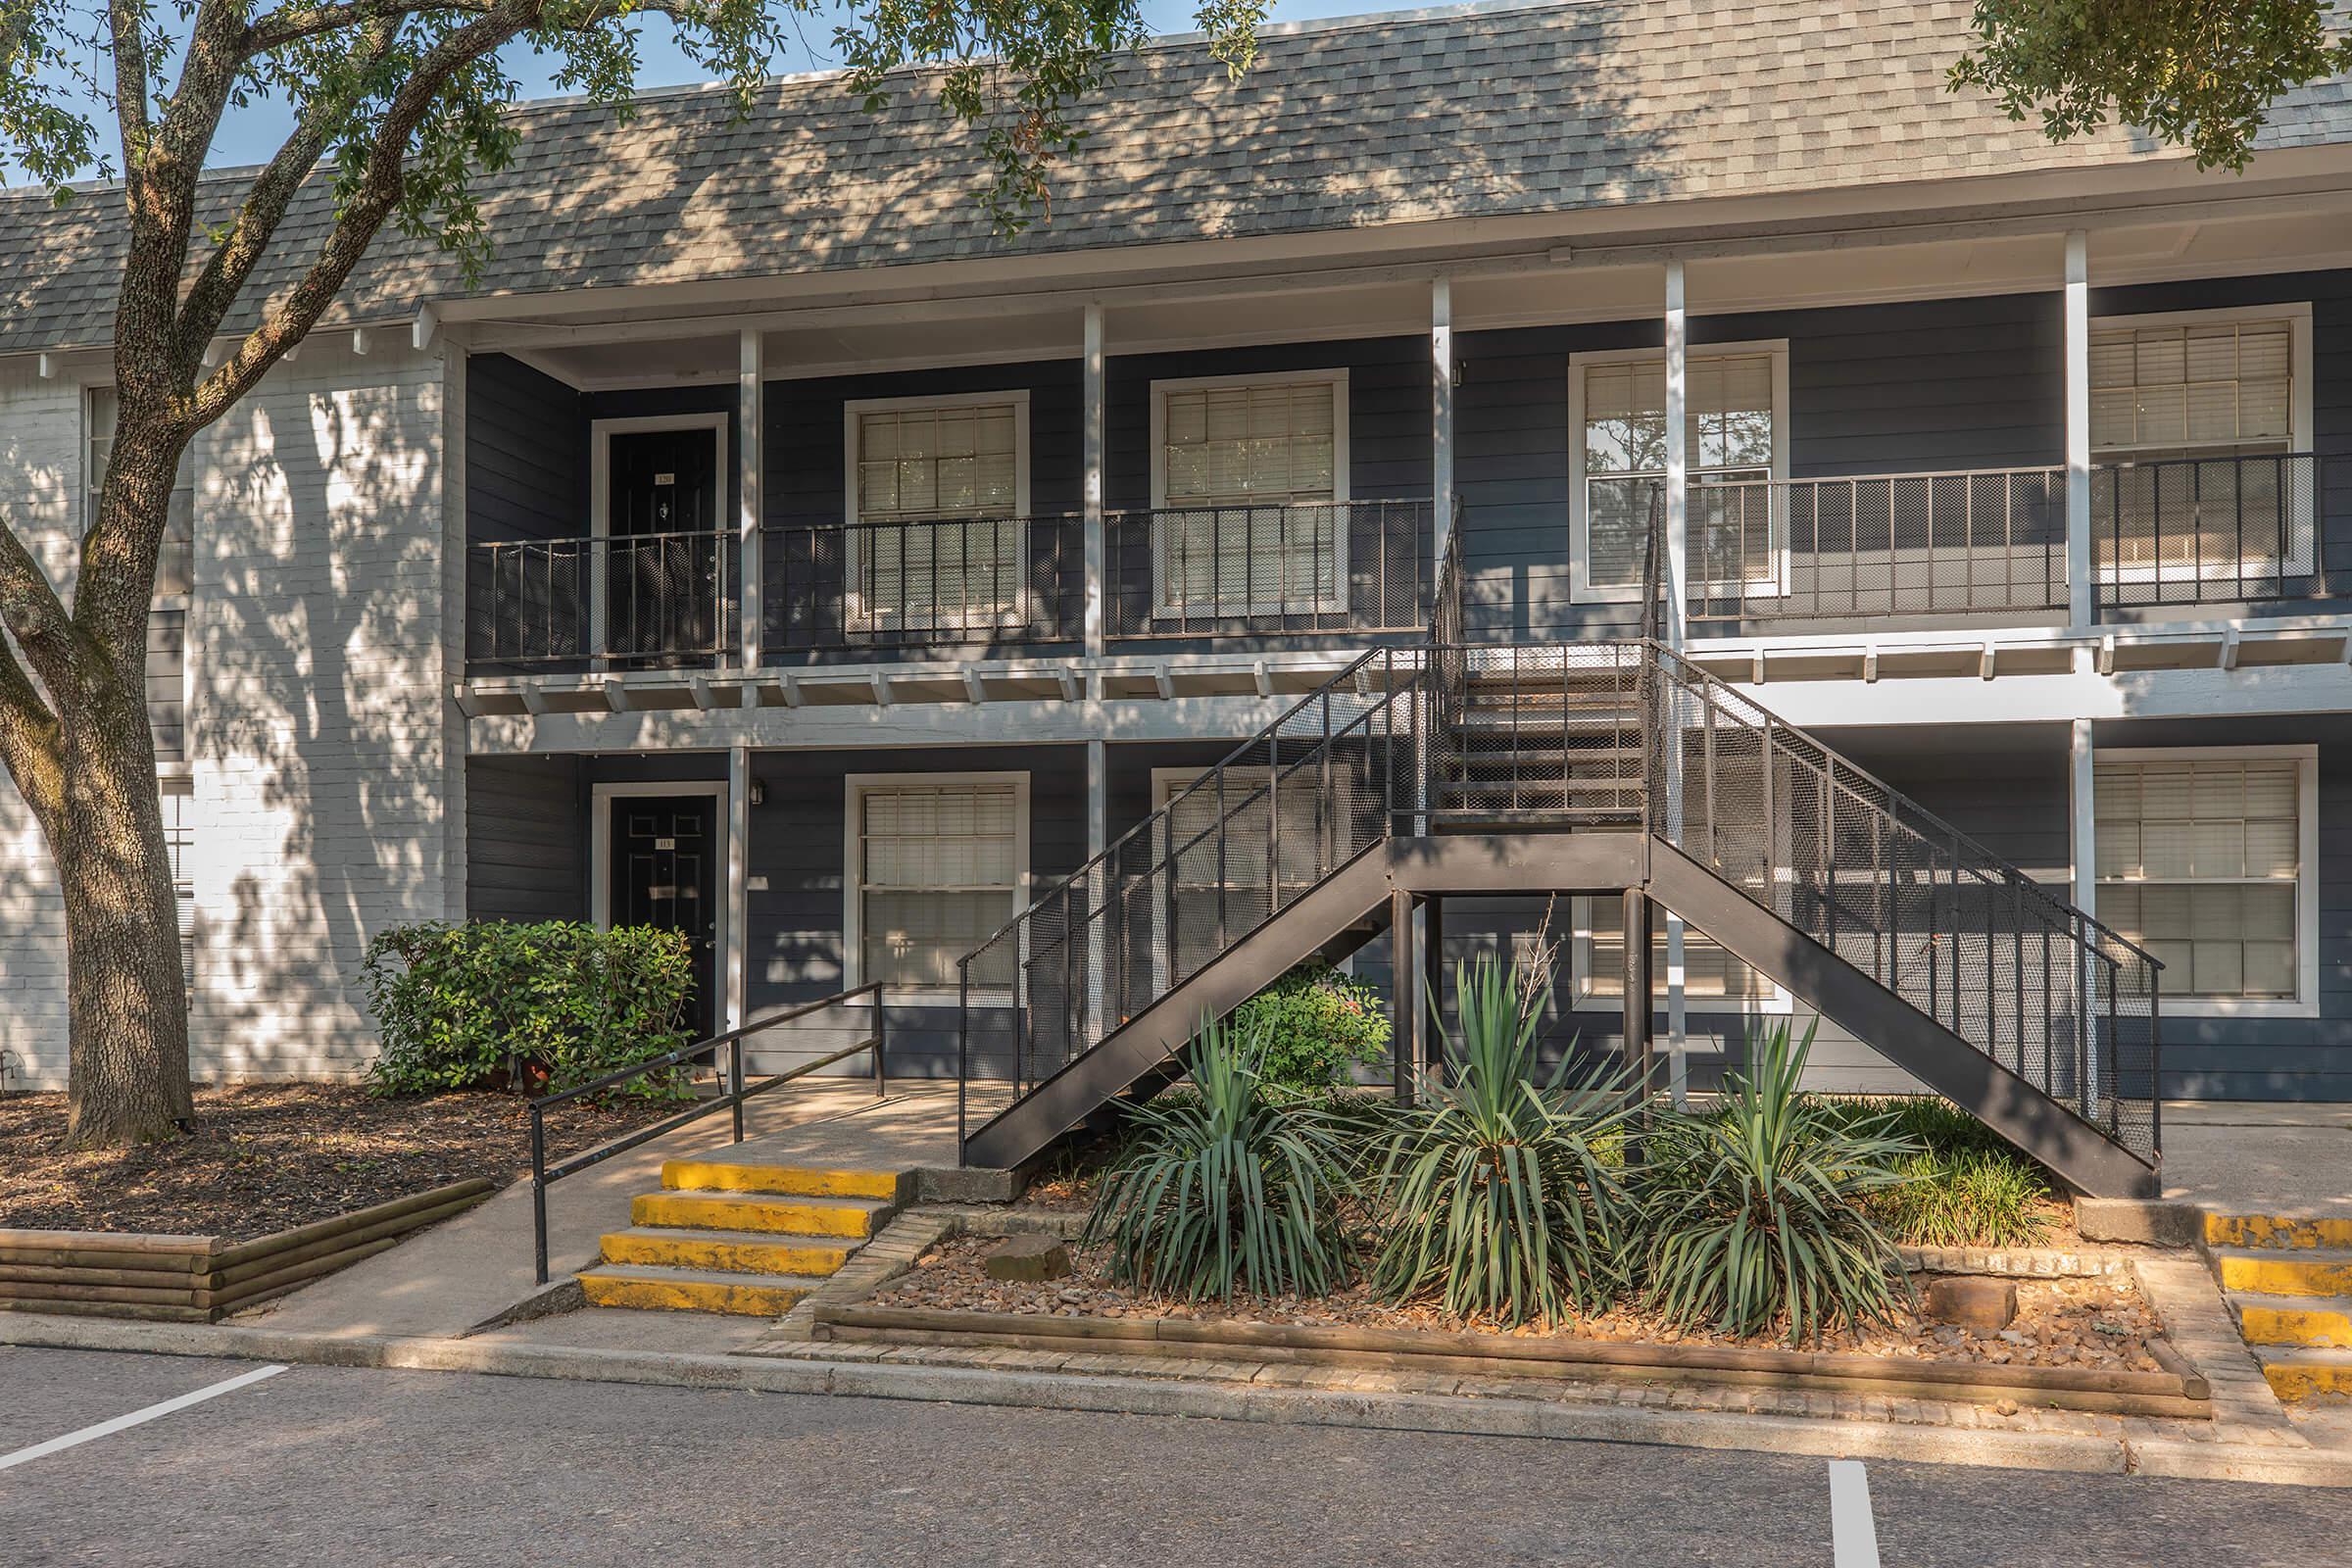 WELCOME HOME TO WHISPERING OAKS APARTMENTS